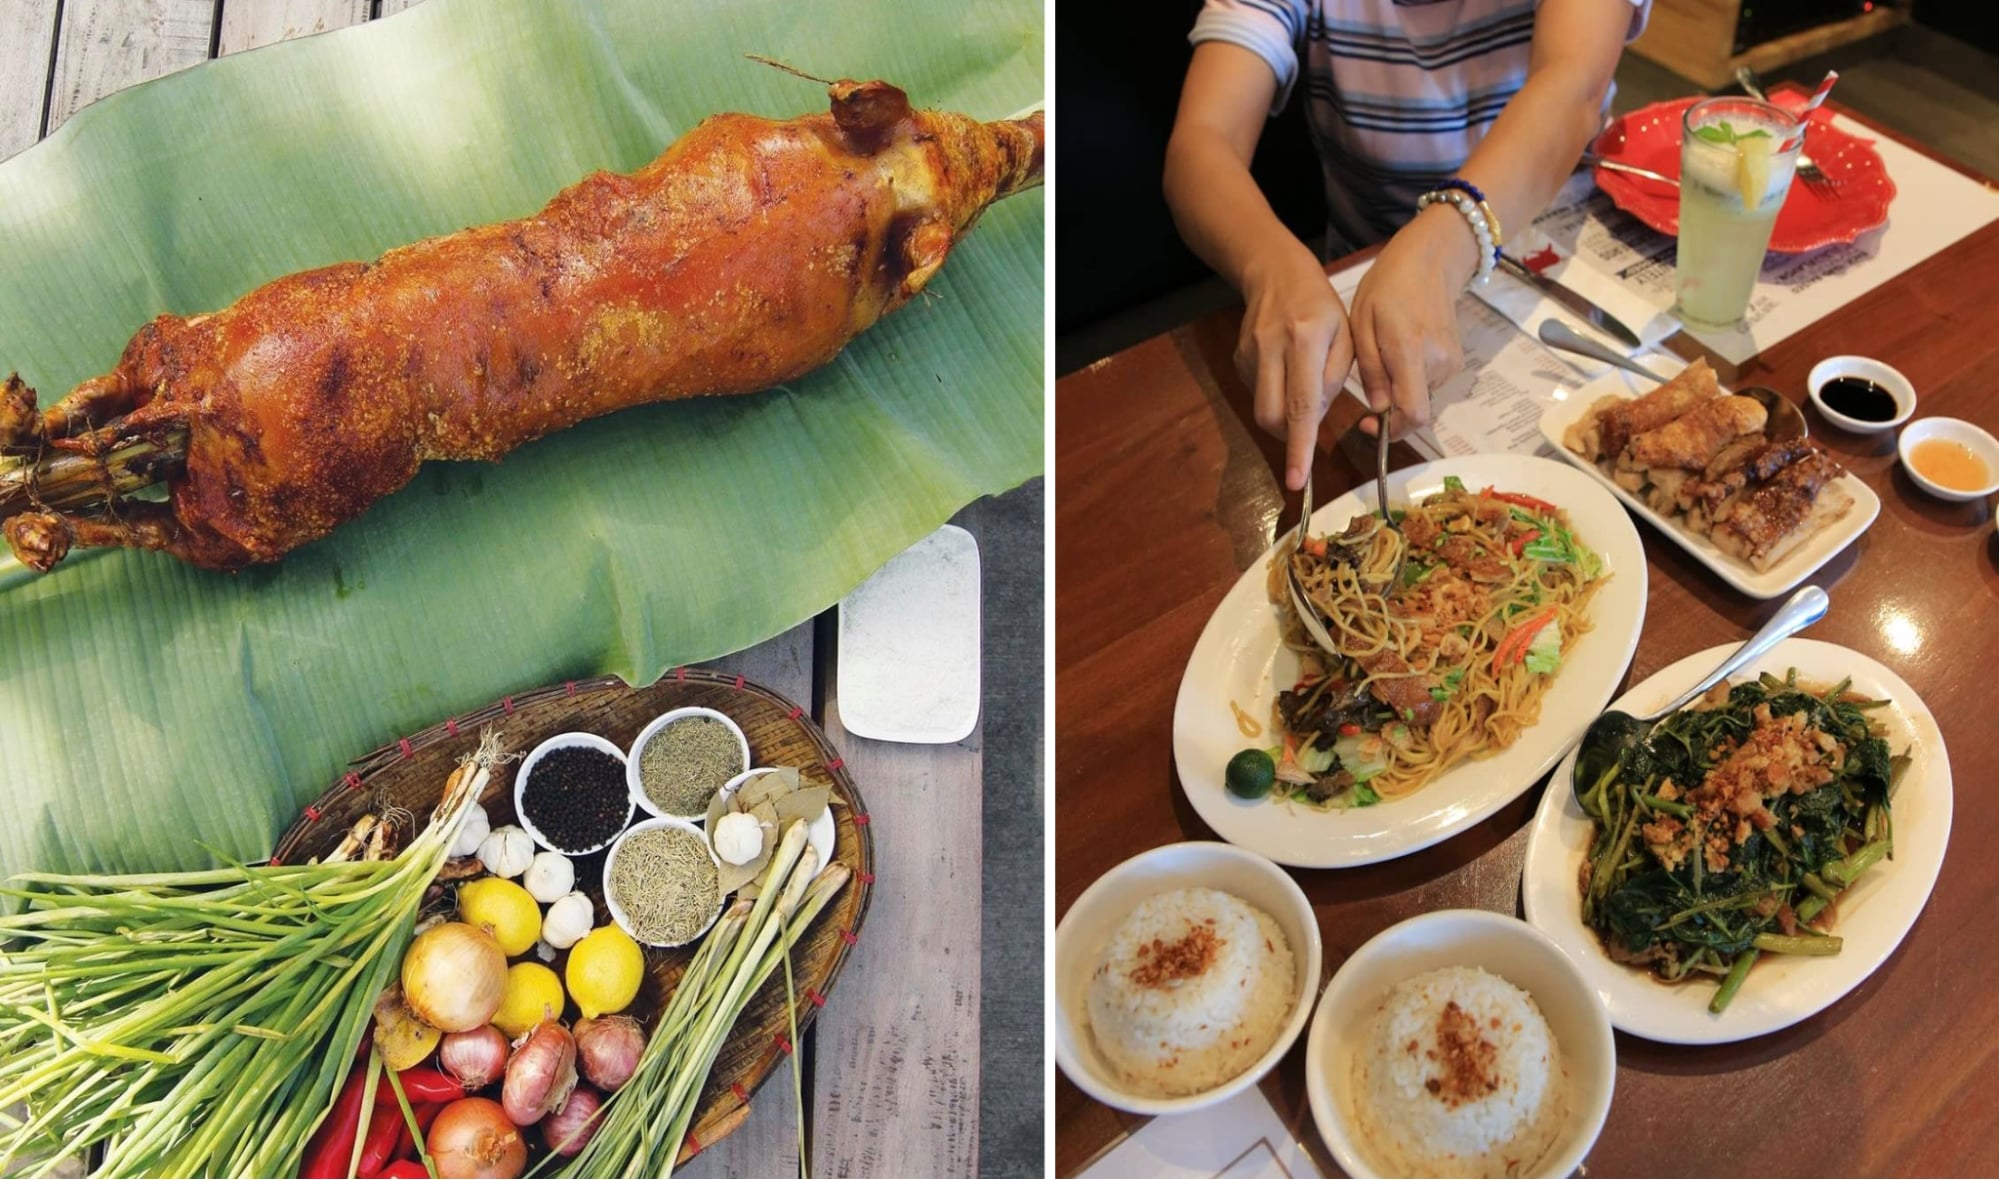 lechon and lechon dishes